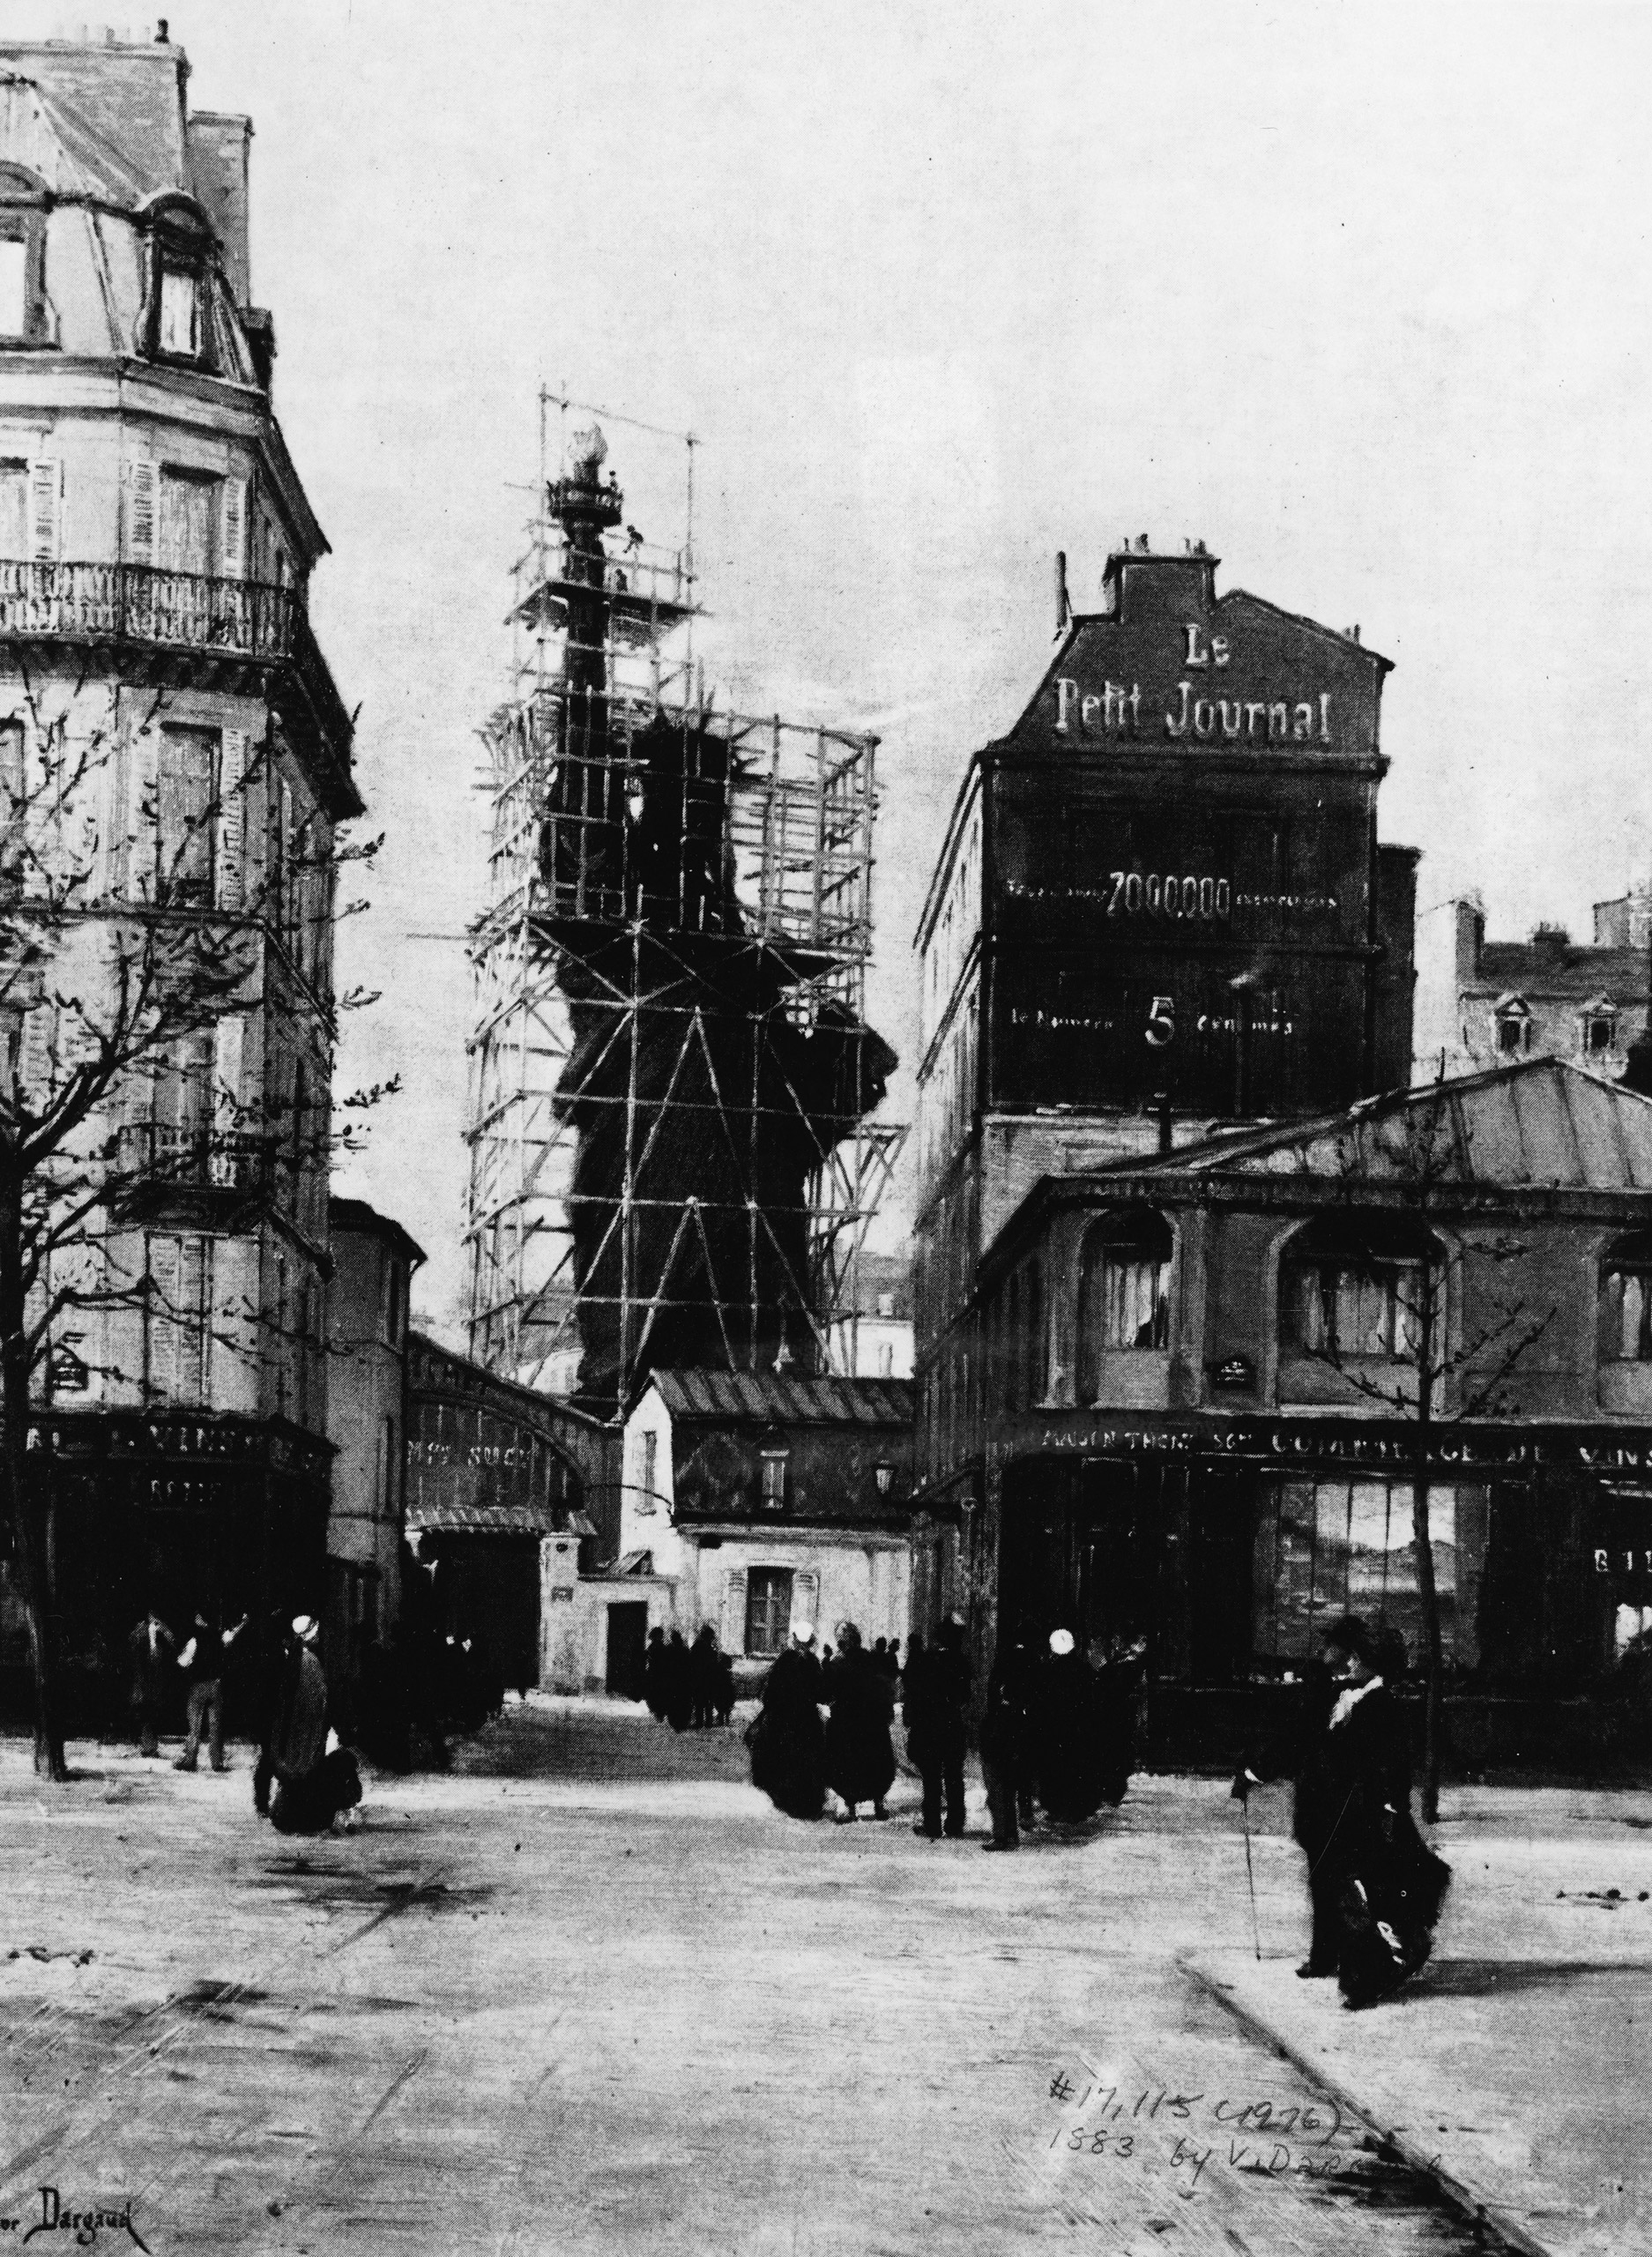 View of the Statue of Liberty enclosed by scaffolding, while under construction, seen from the Rue de Chazelles, Paris, France, circa 1884.